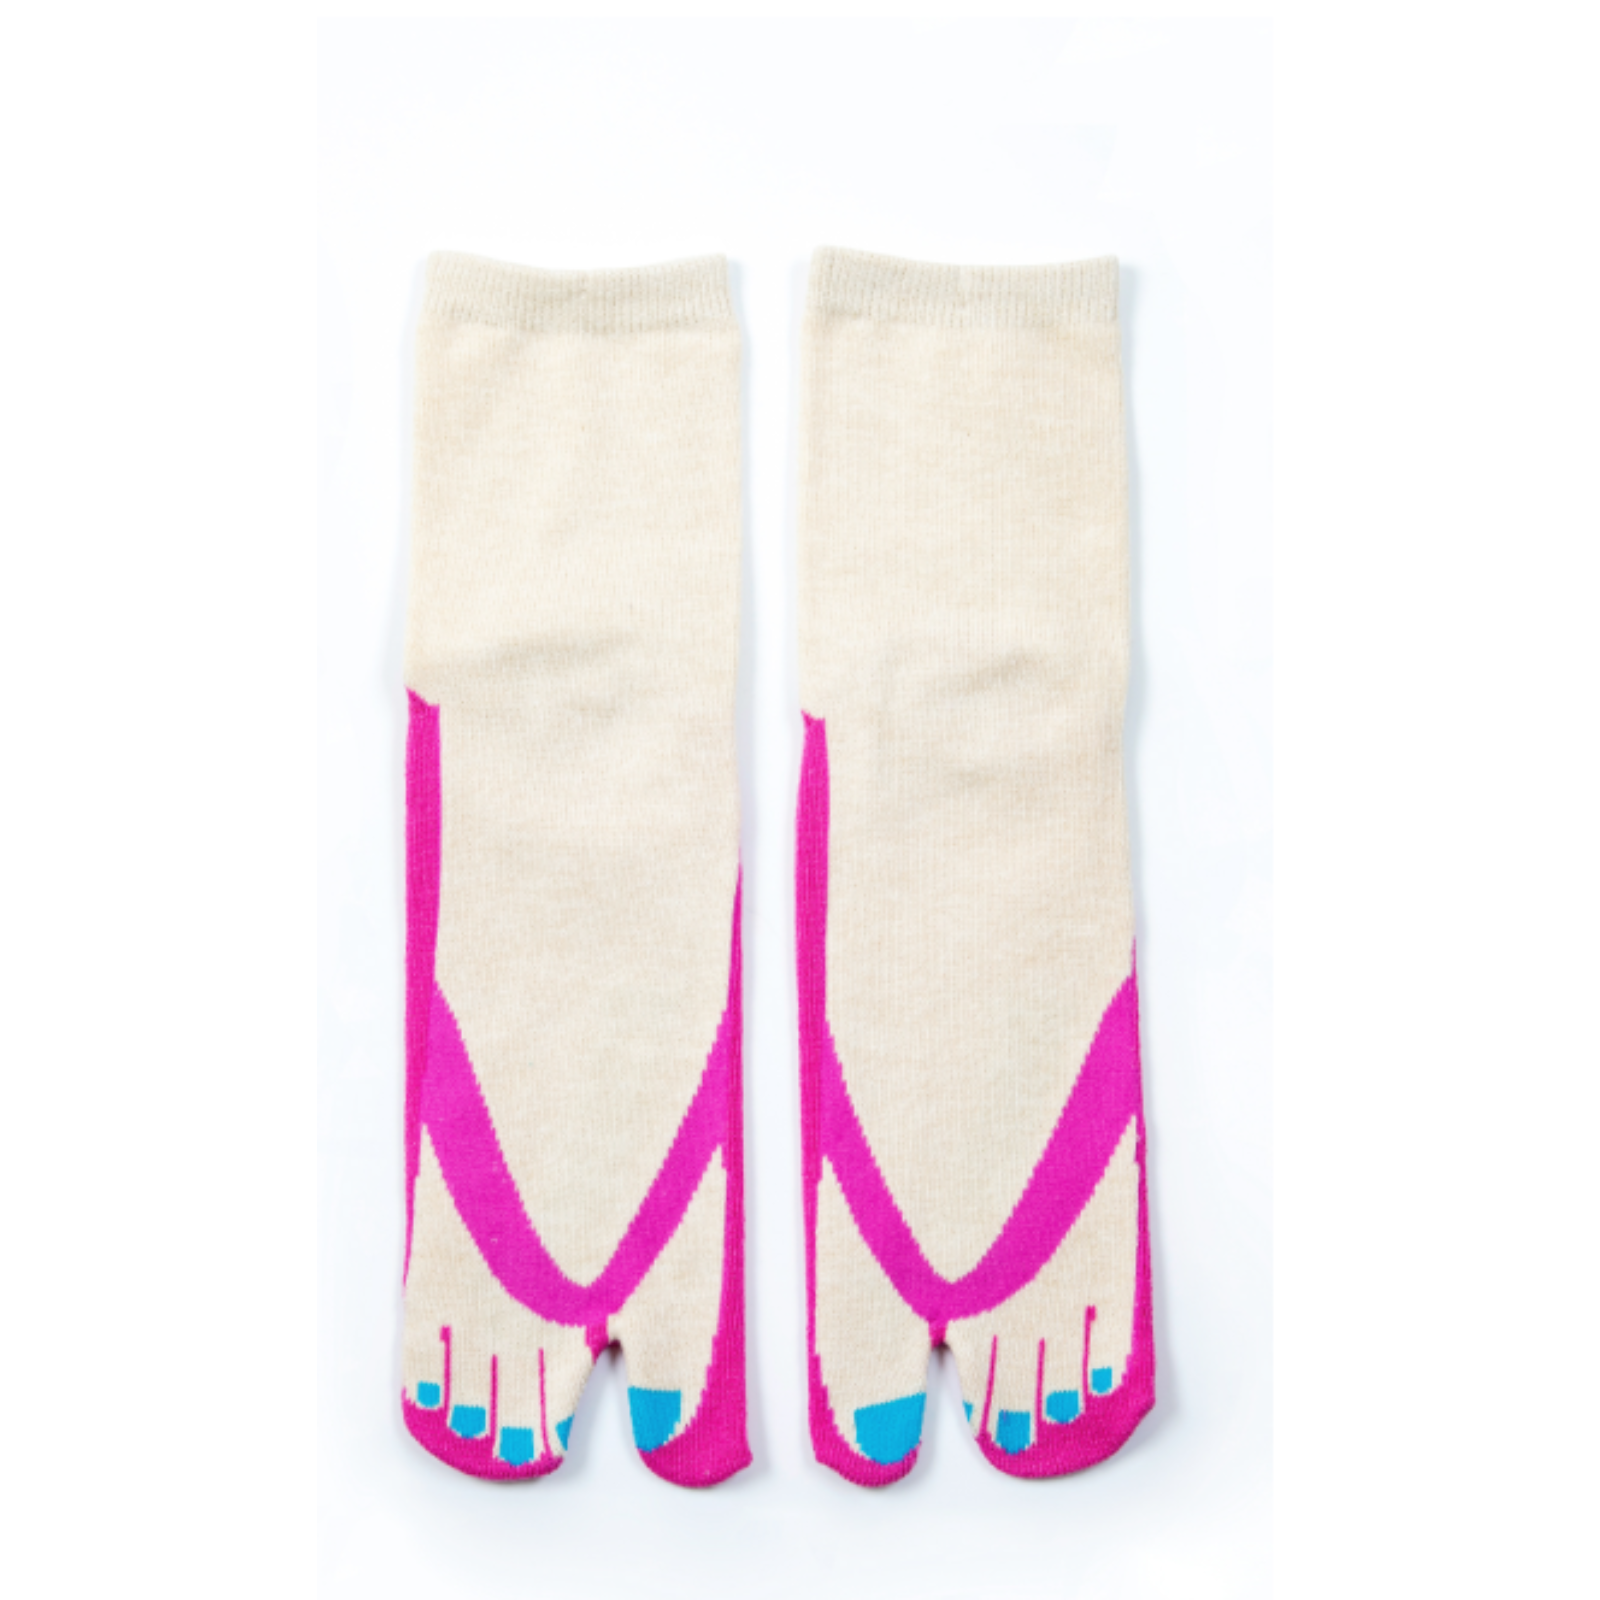 Socks Up Pedicure women's toe tabbisock featuring pink flip flops with blue toe nails shown on display